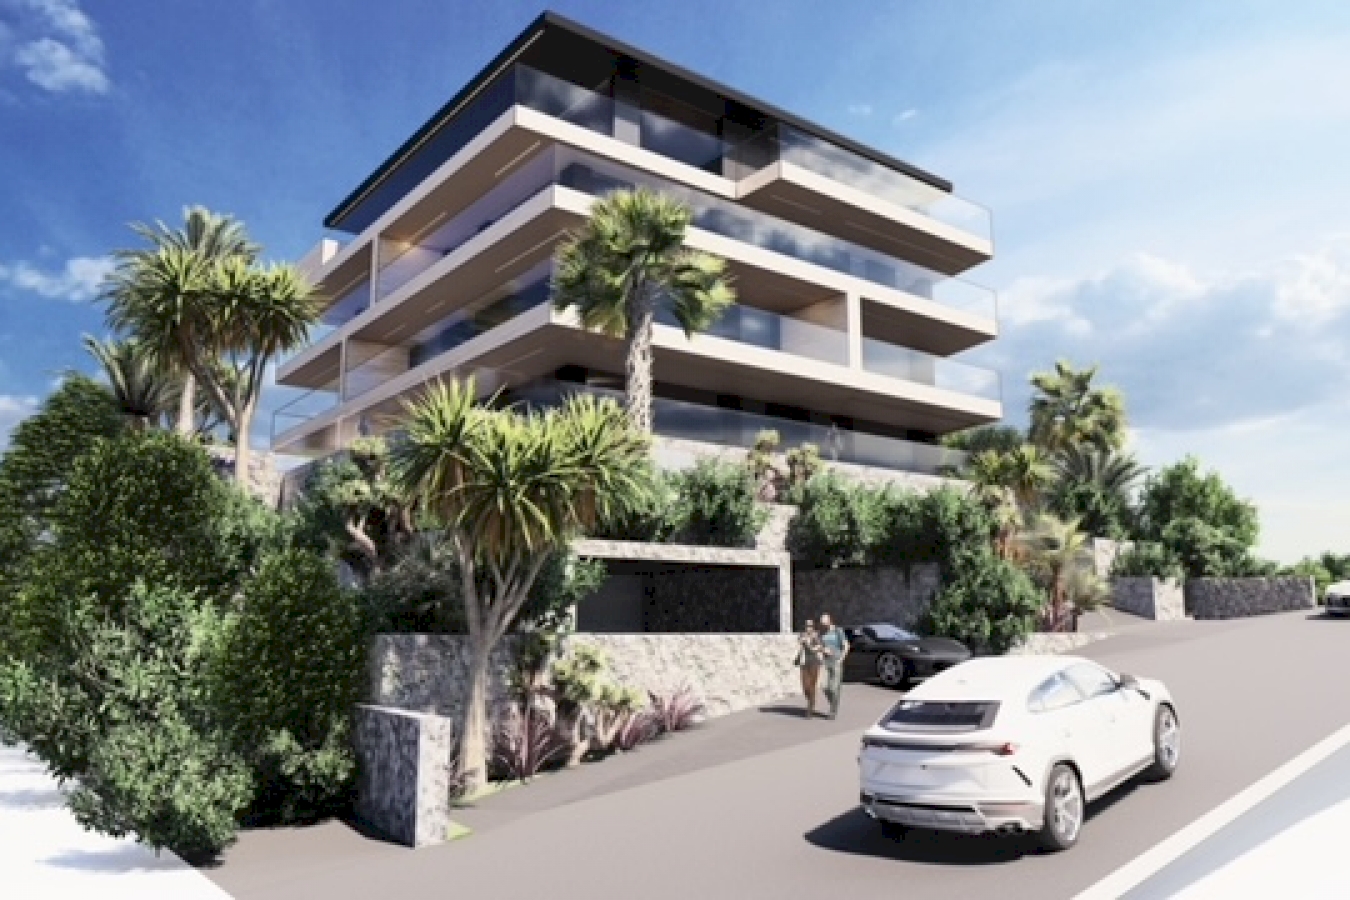 Luxury apartments in the city center of Opatija